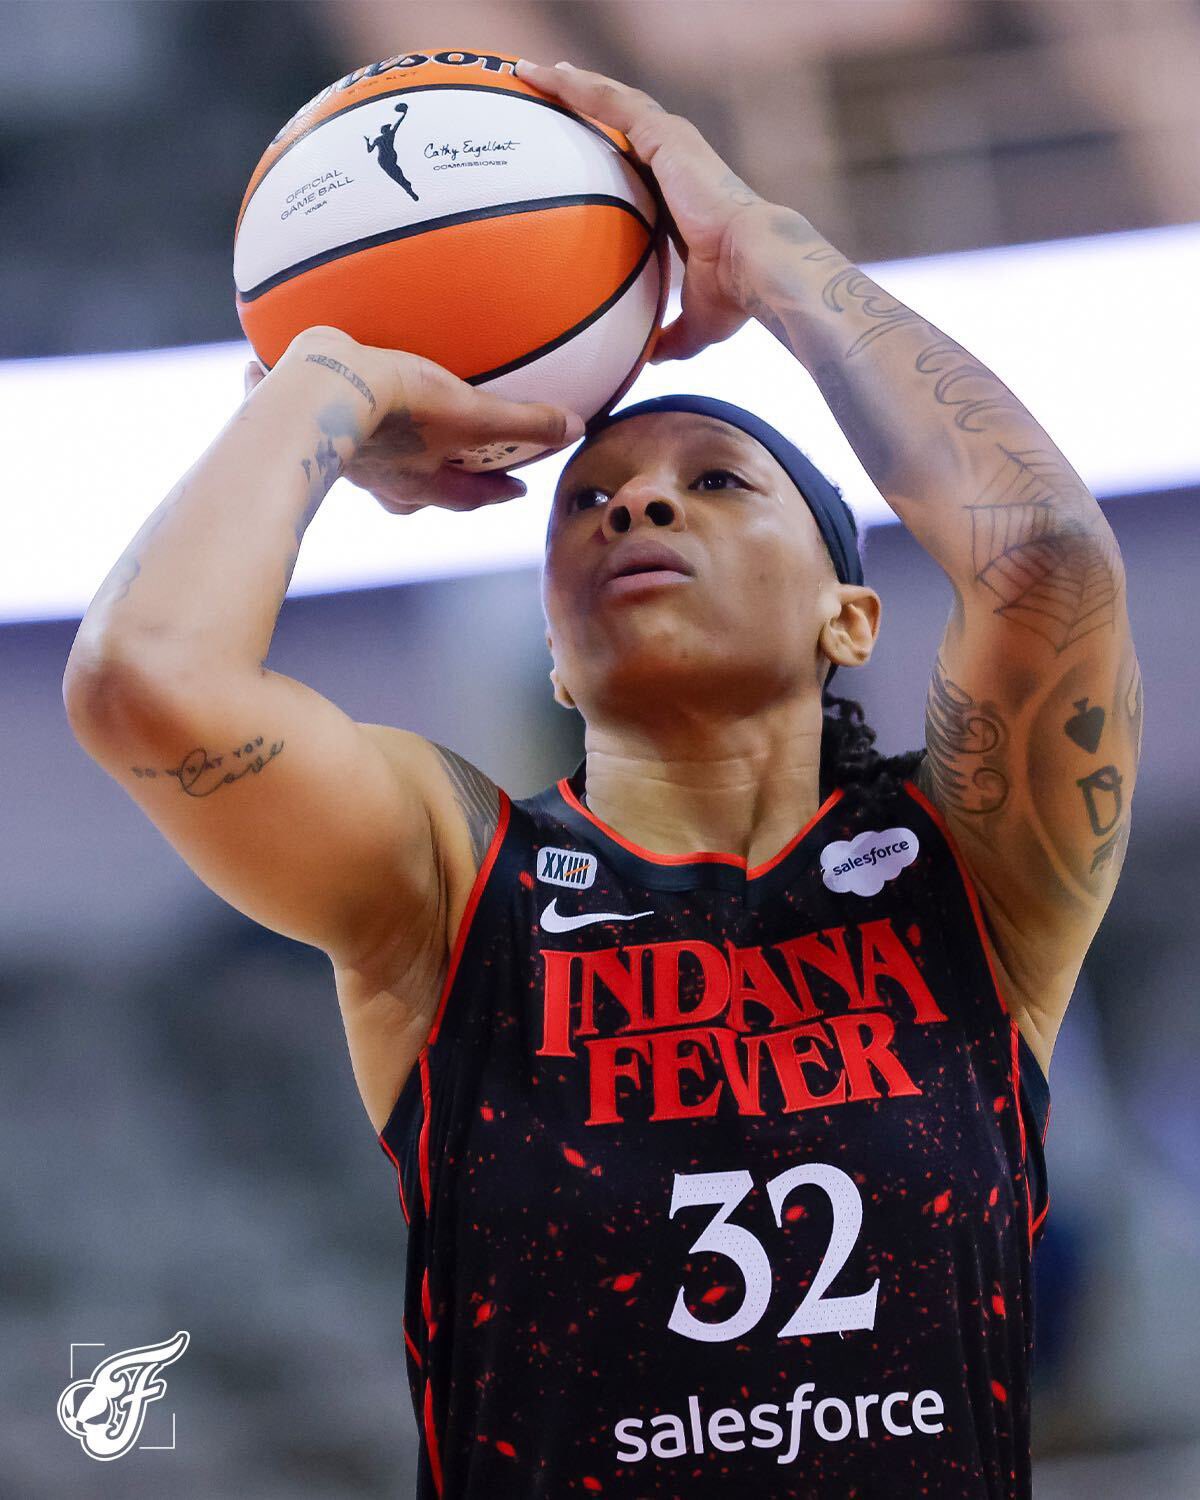 WNBA on X: These @IndianaFever Stranger Things jerseys in